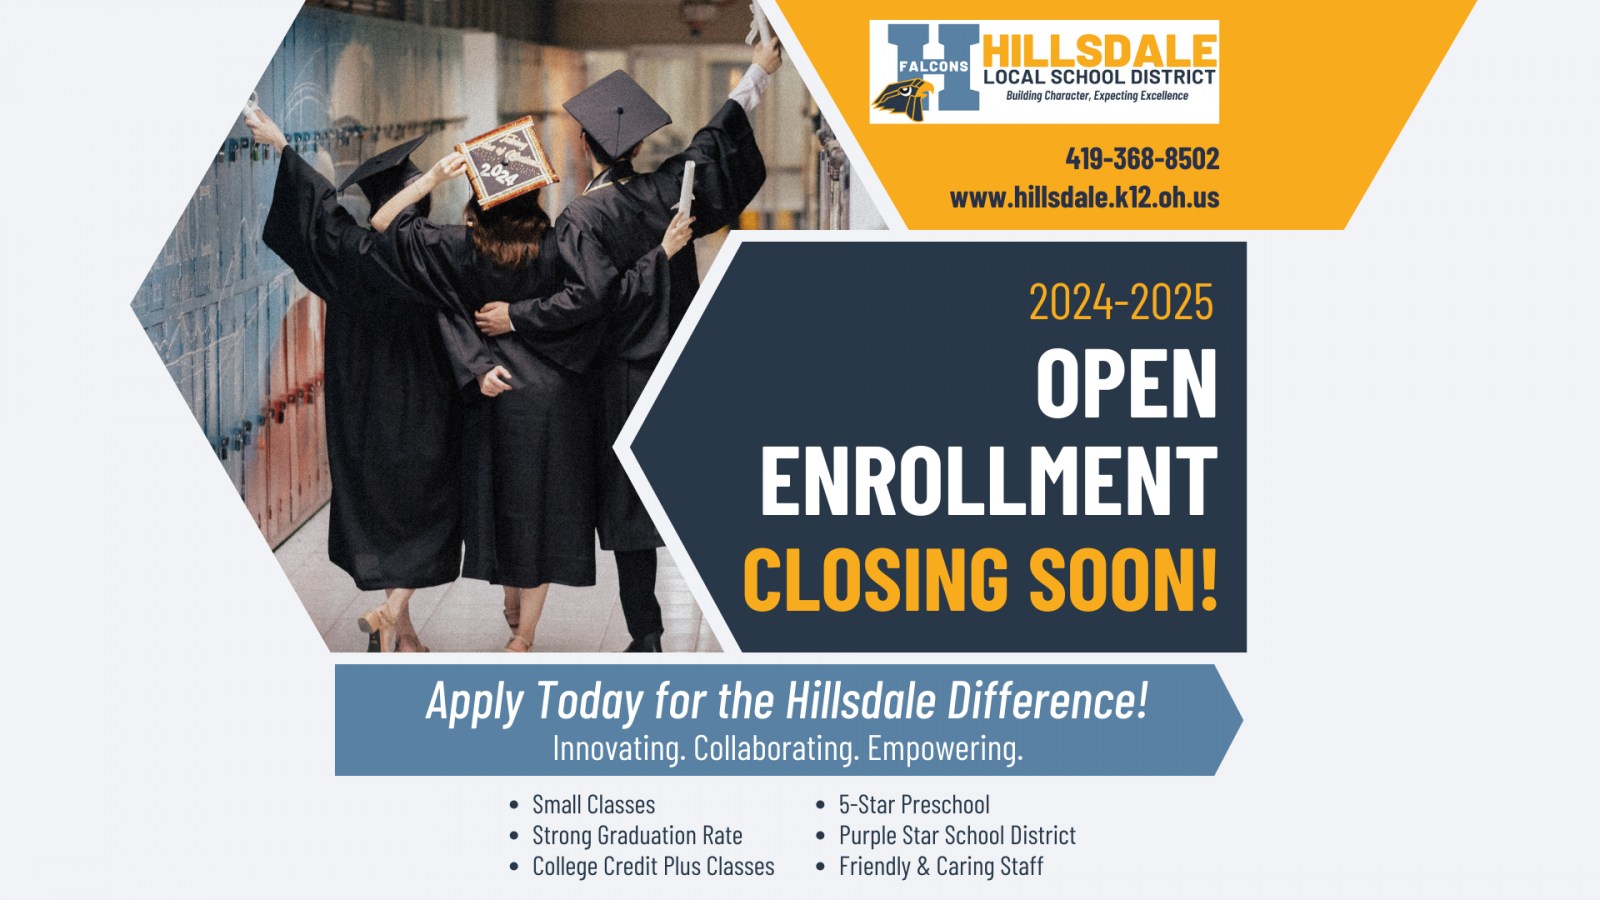 2024-2025 Open Enrolment is closing soon. Apply today for the Hillsdale Difference!